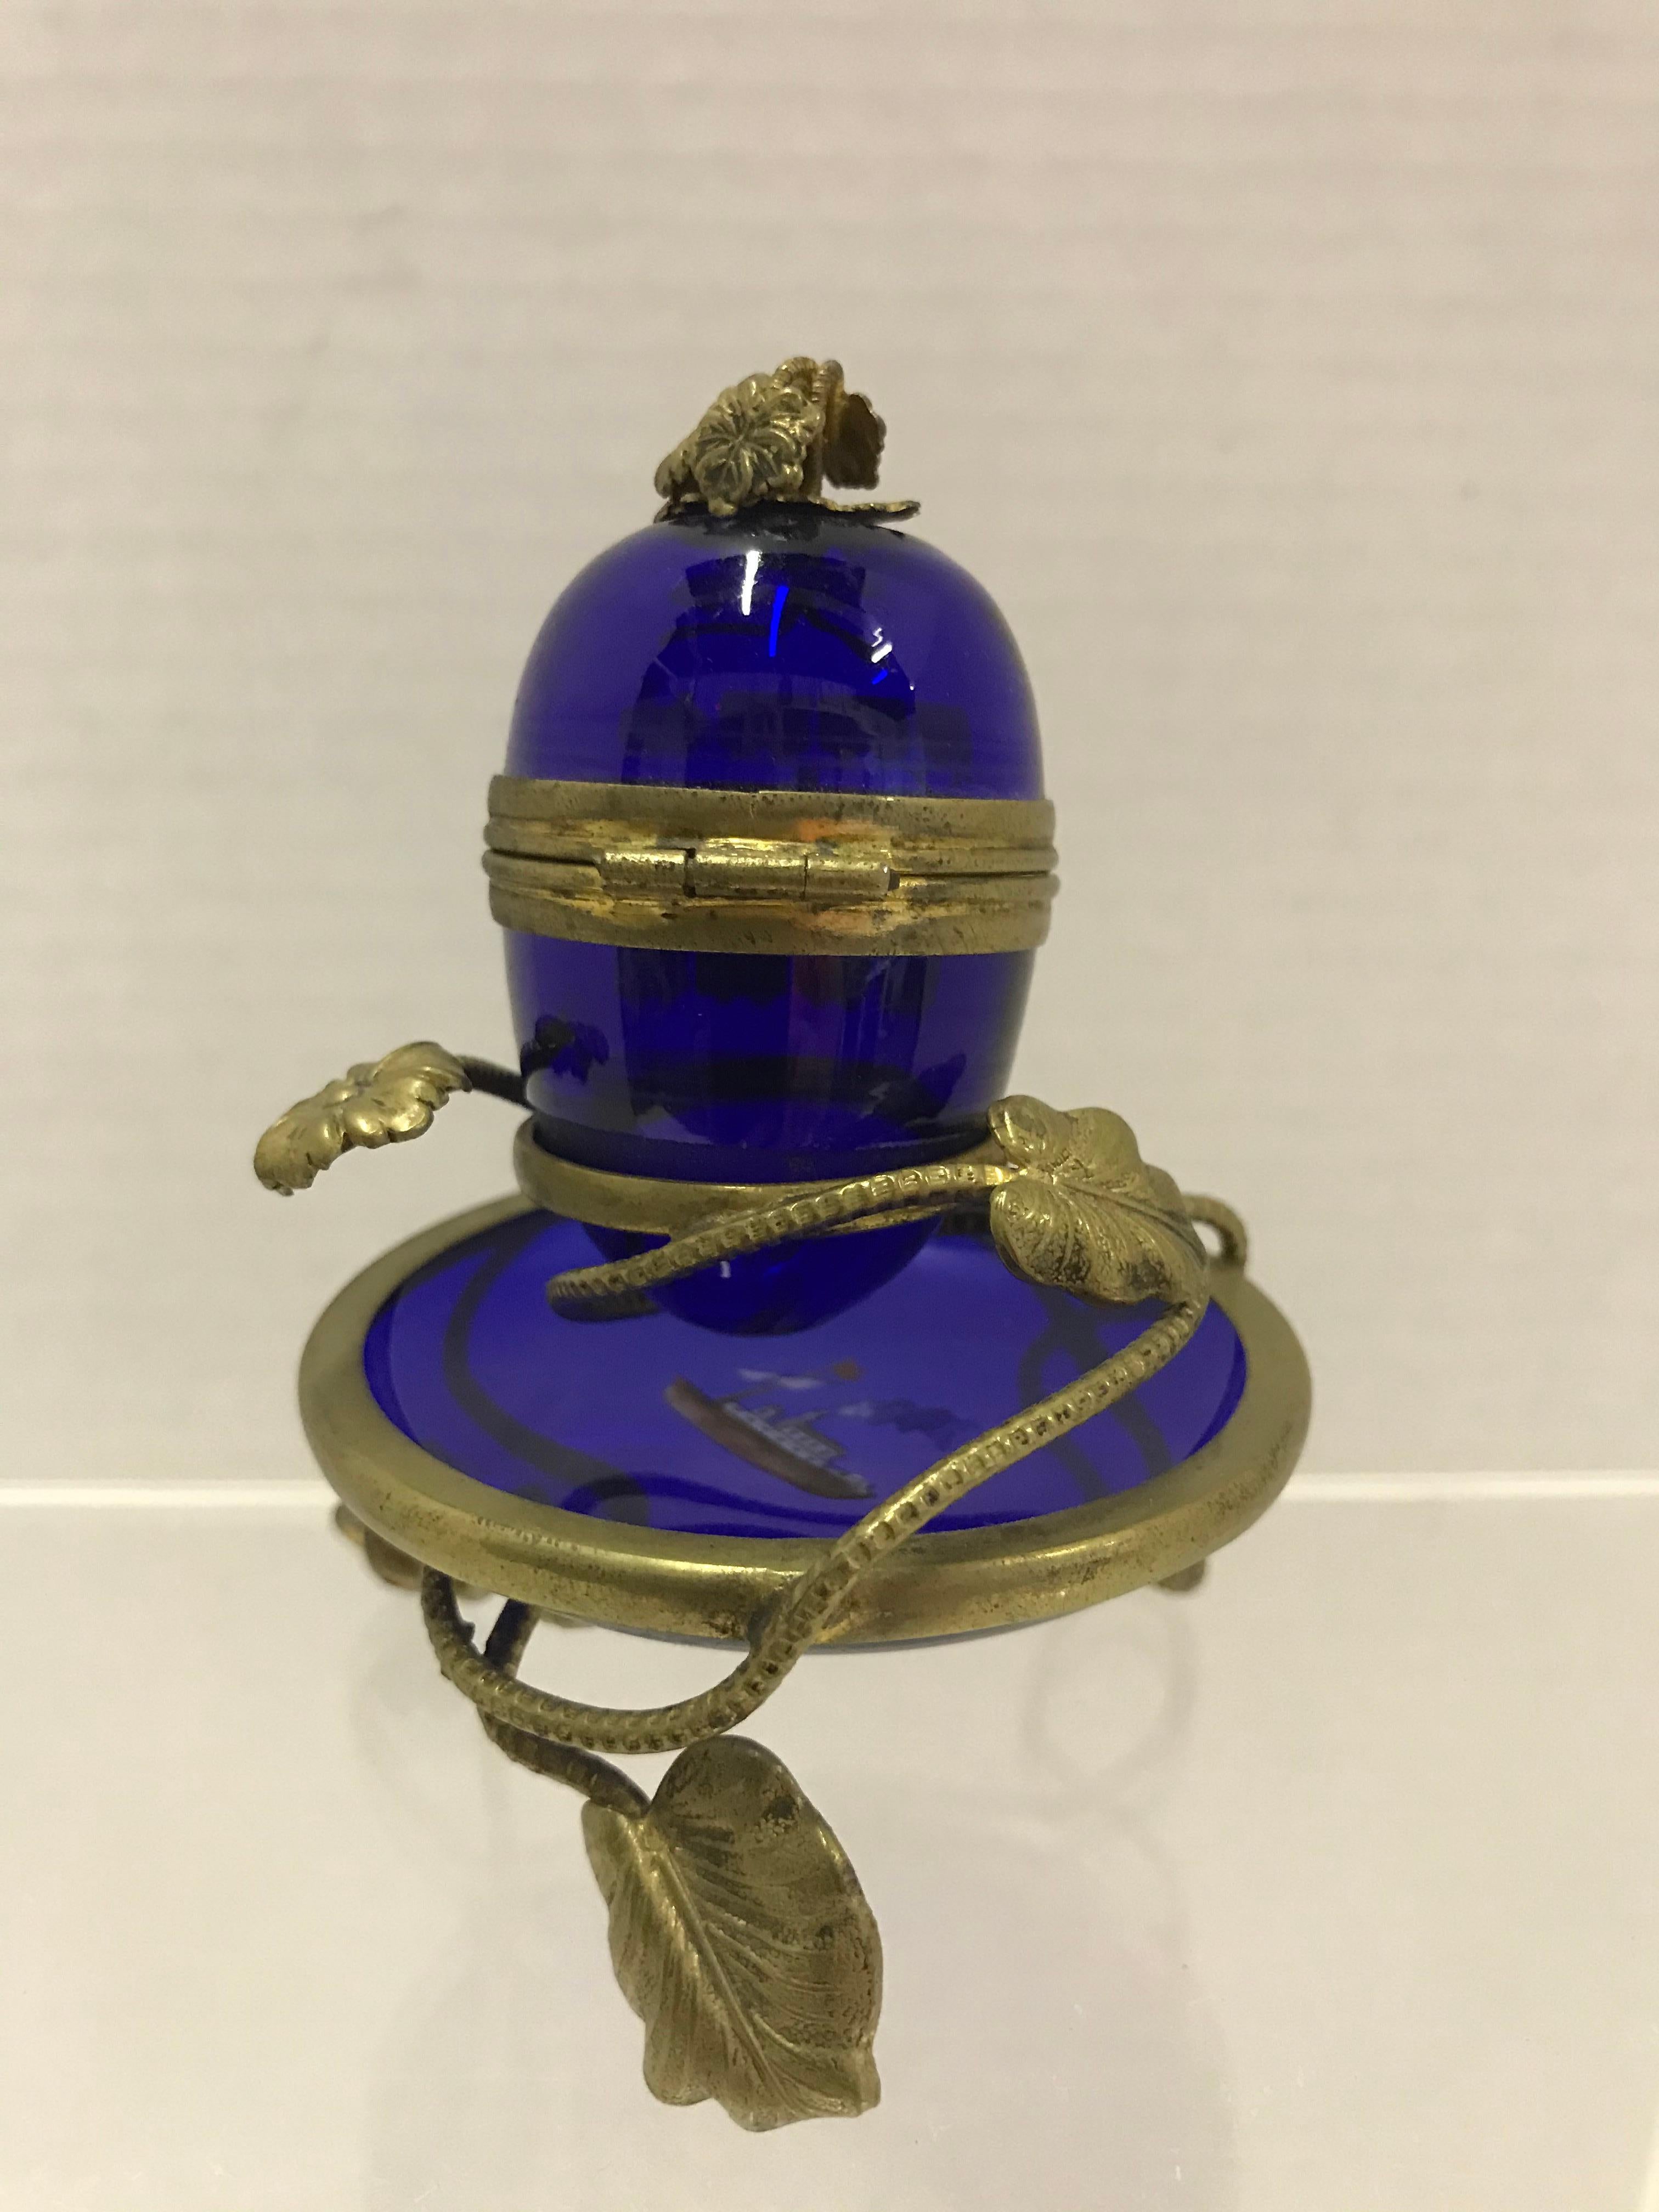 Russian Imperial Glasswork of St. Petersburg 1900s Cobalt Blue Glass Egg on Stand